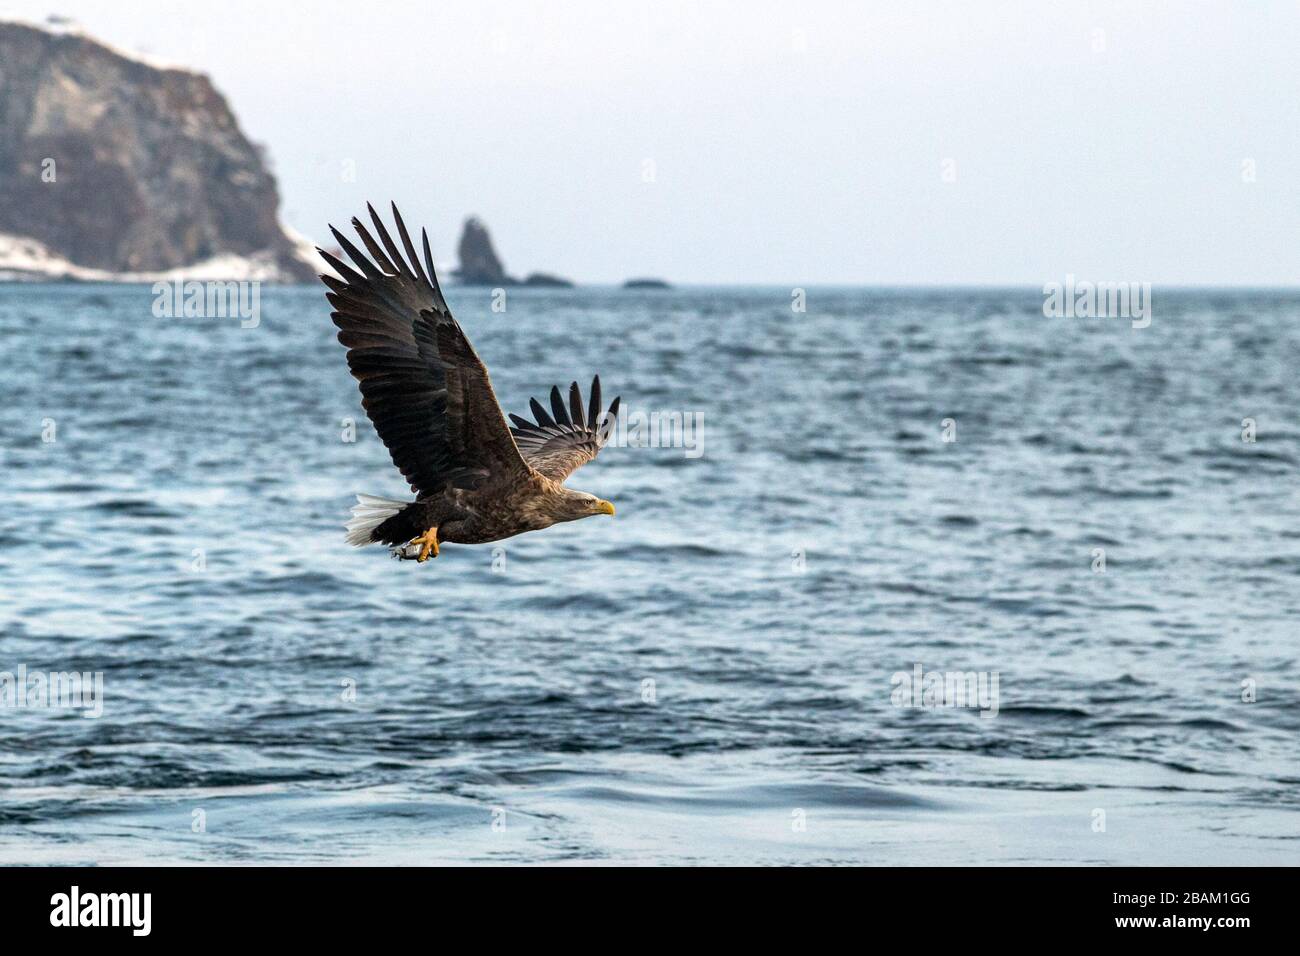 White-tailed eagle in flight, majestic eagle with a fish which has been just plucked from the water in Hokkaido, Japan, eagle with cliffs in backgroun Stock Photo